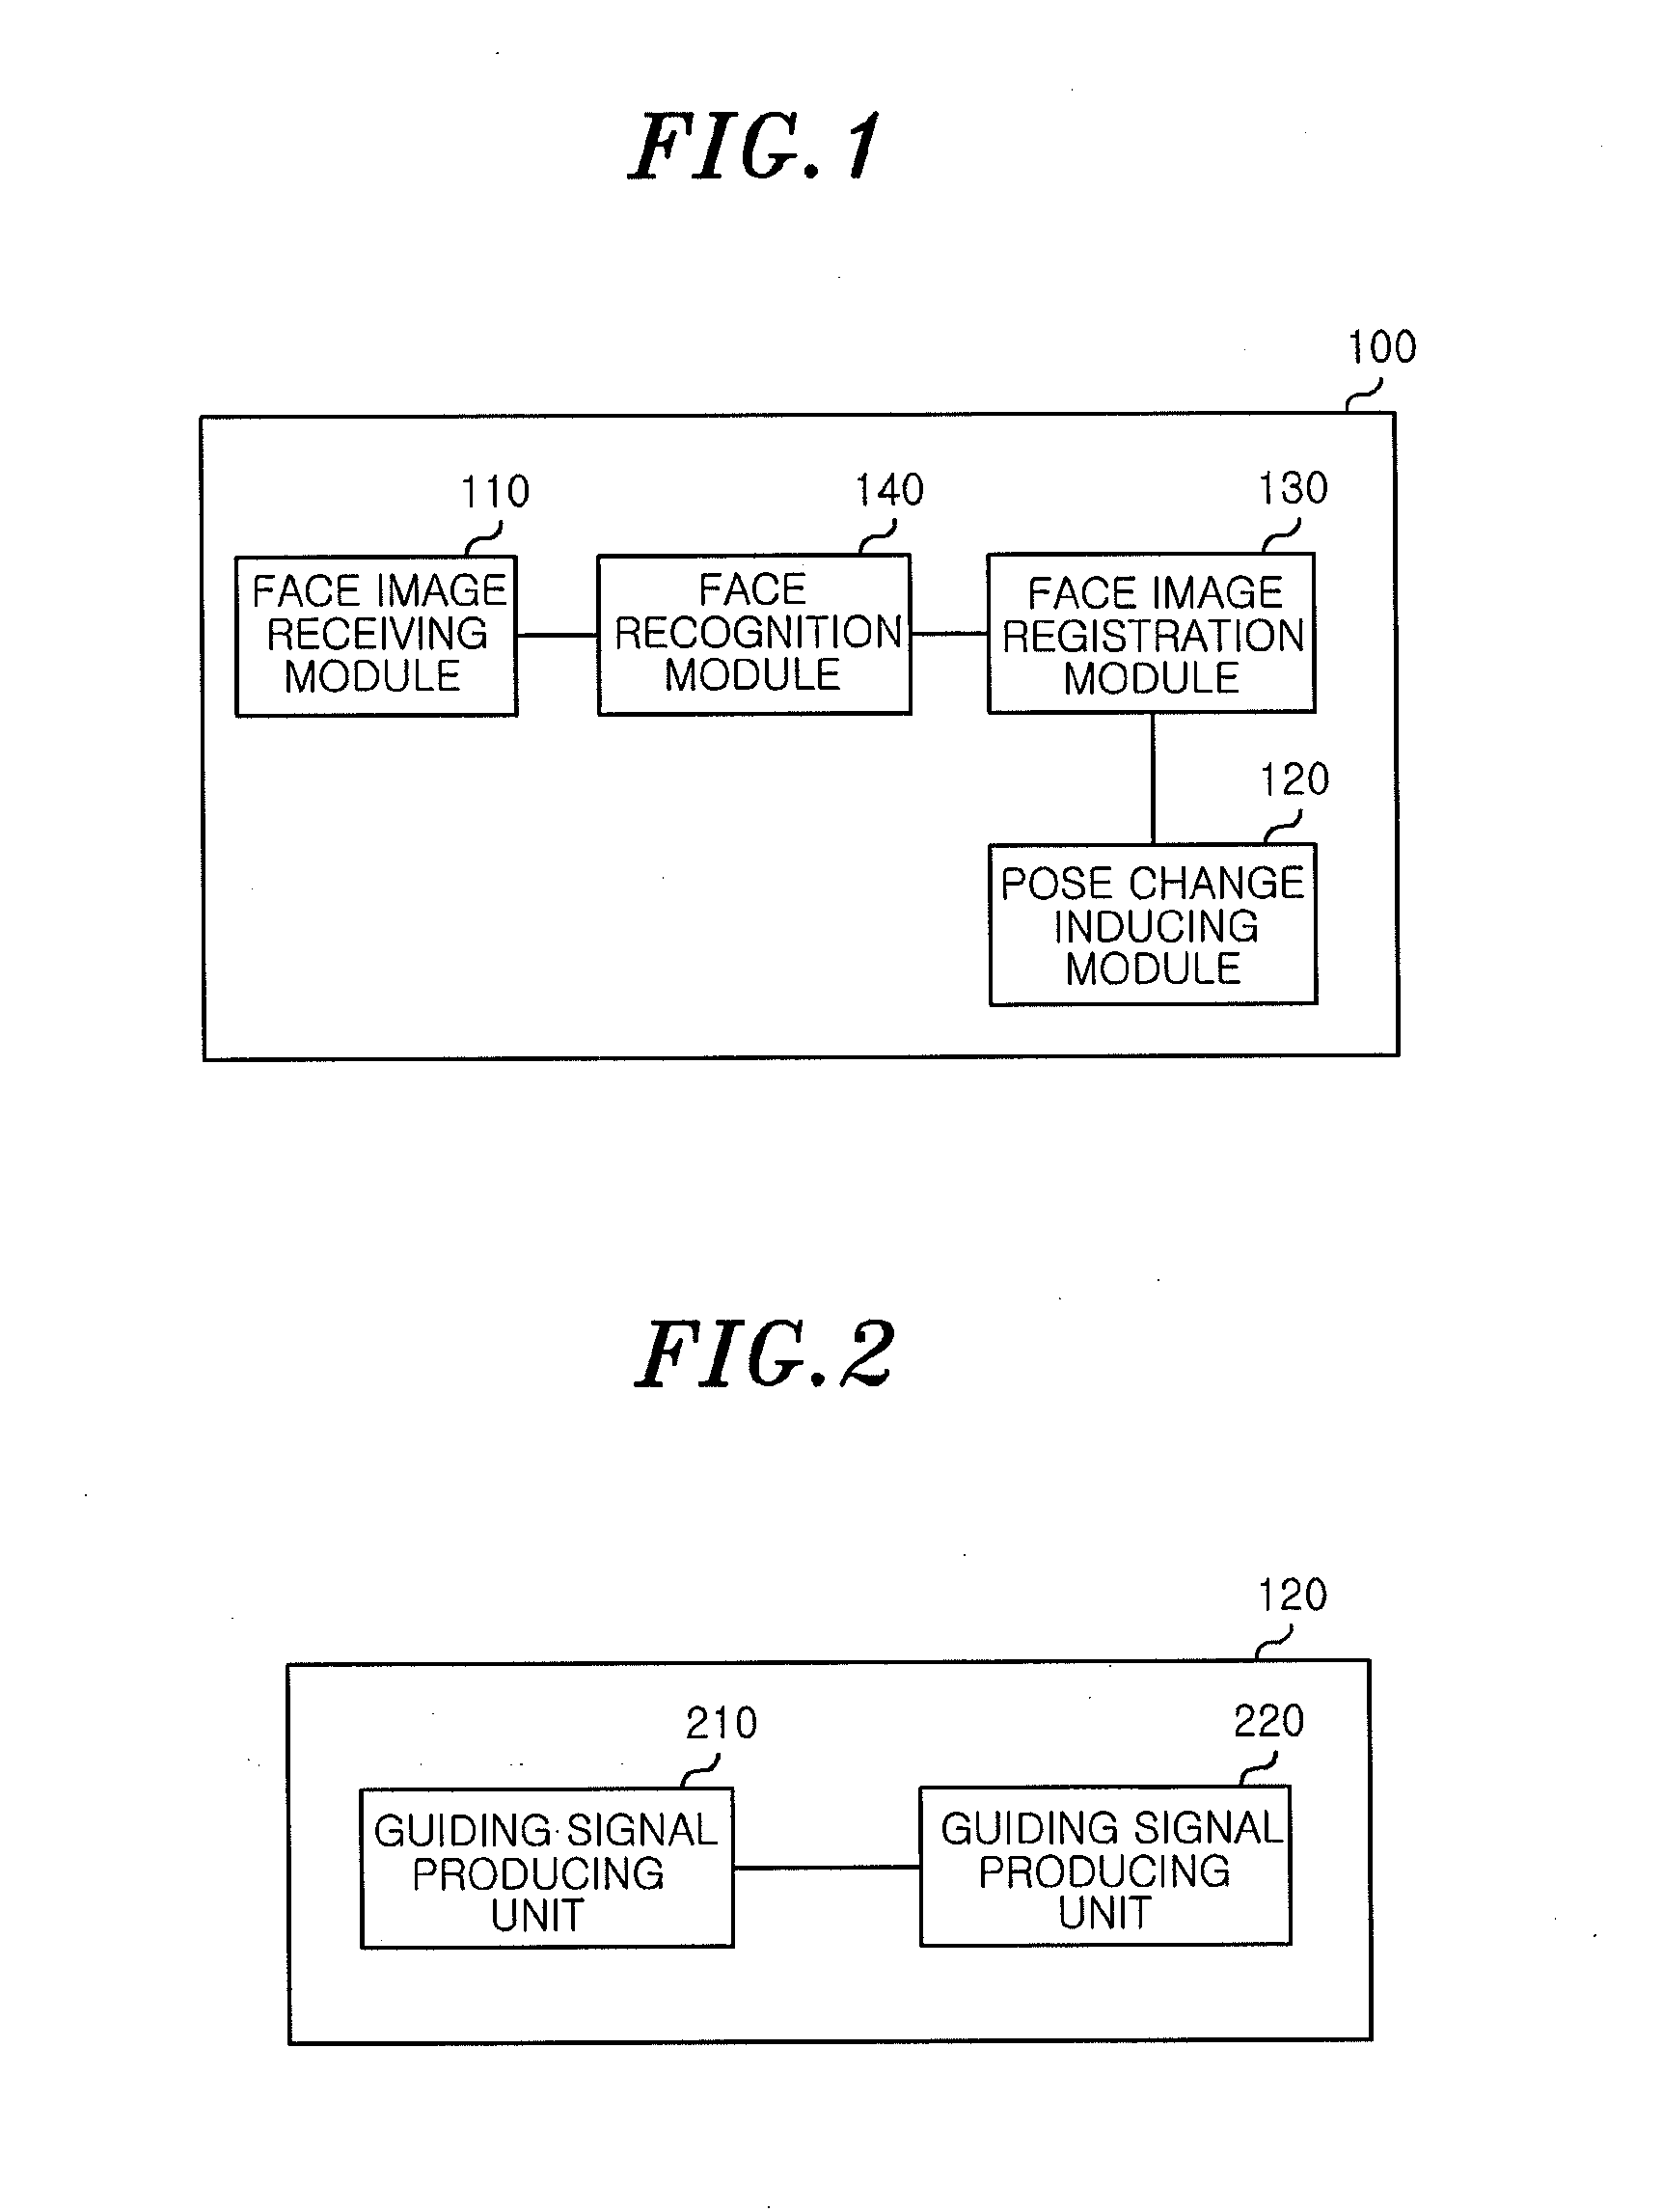 Method and apparatus for registering face images, and apparatus for inducing pose change, and apparatus for recognizing faces